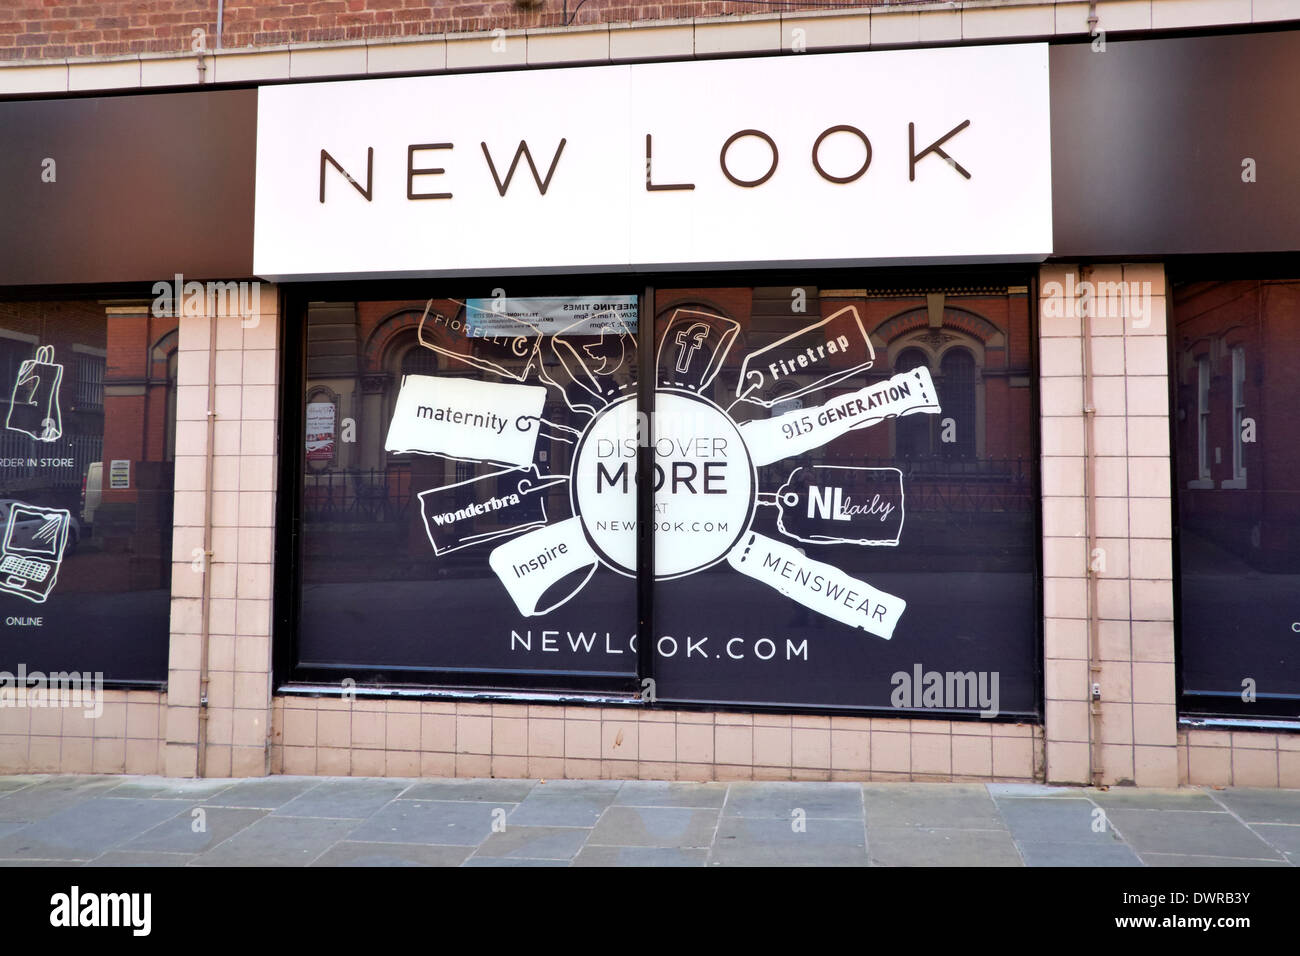 New Look shop front uk Stock Photo